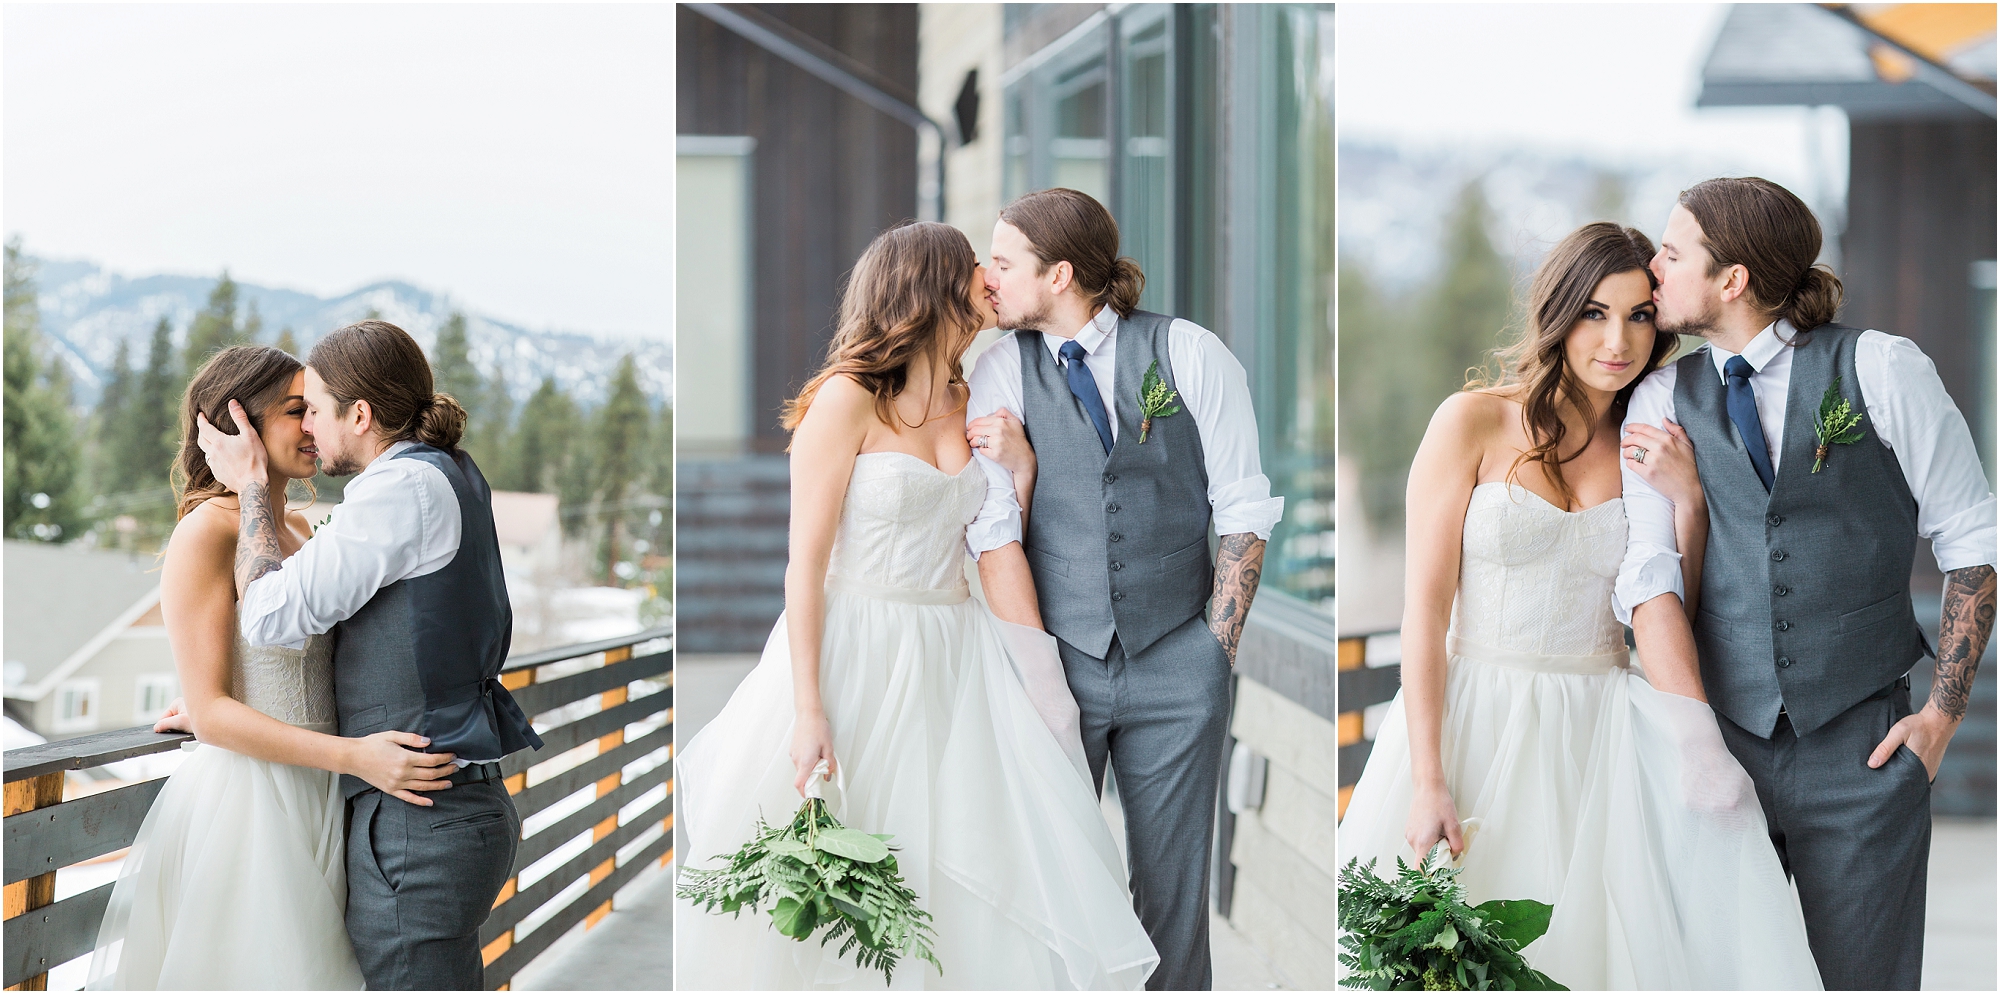 A gorgeous free-spirited styled wedding shoot captured perfectly by Bend OR Wedding photographer, Erica Swantek. 